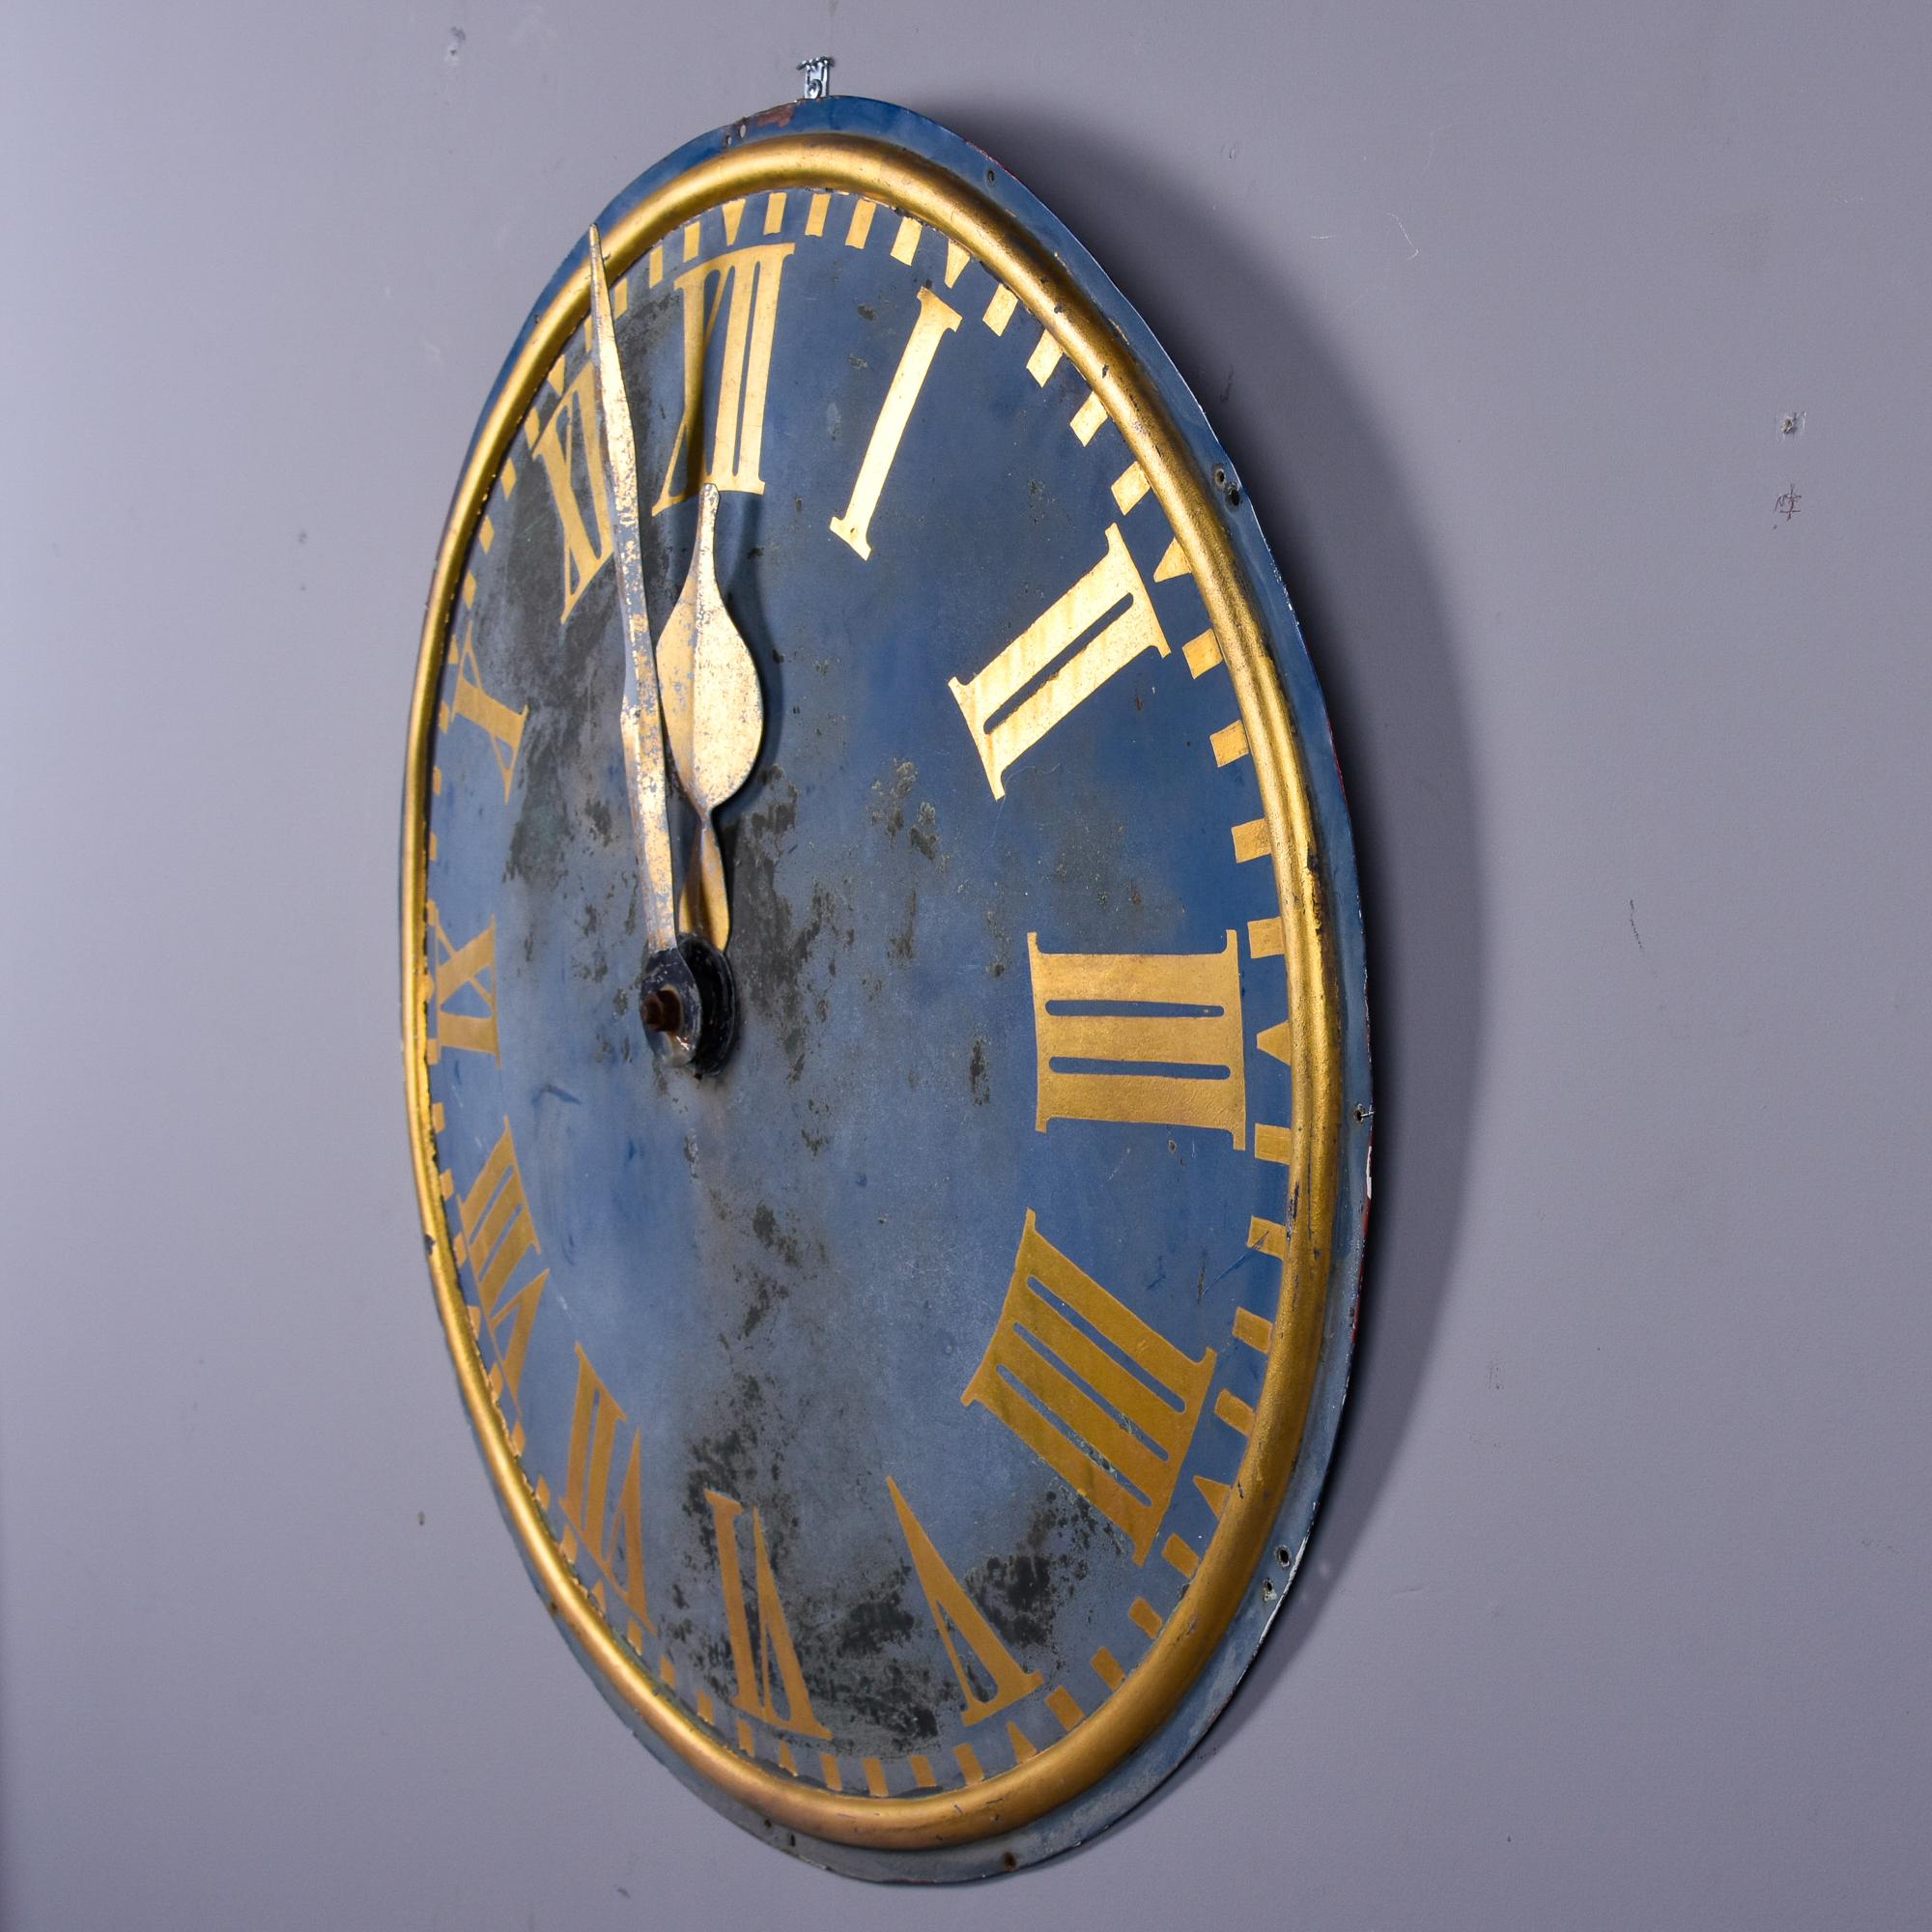 Early 20th C French Antique Round Clock Face For Sale 1